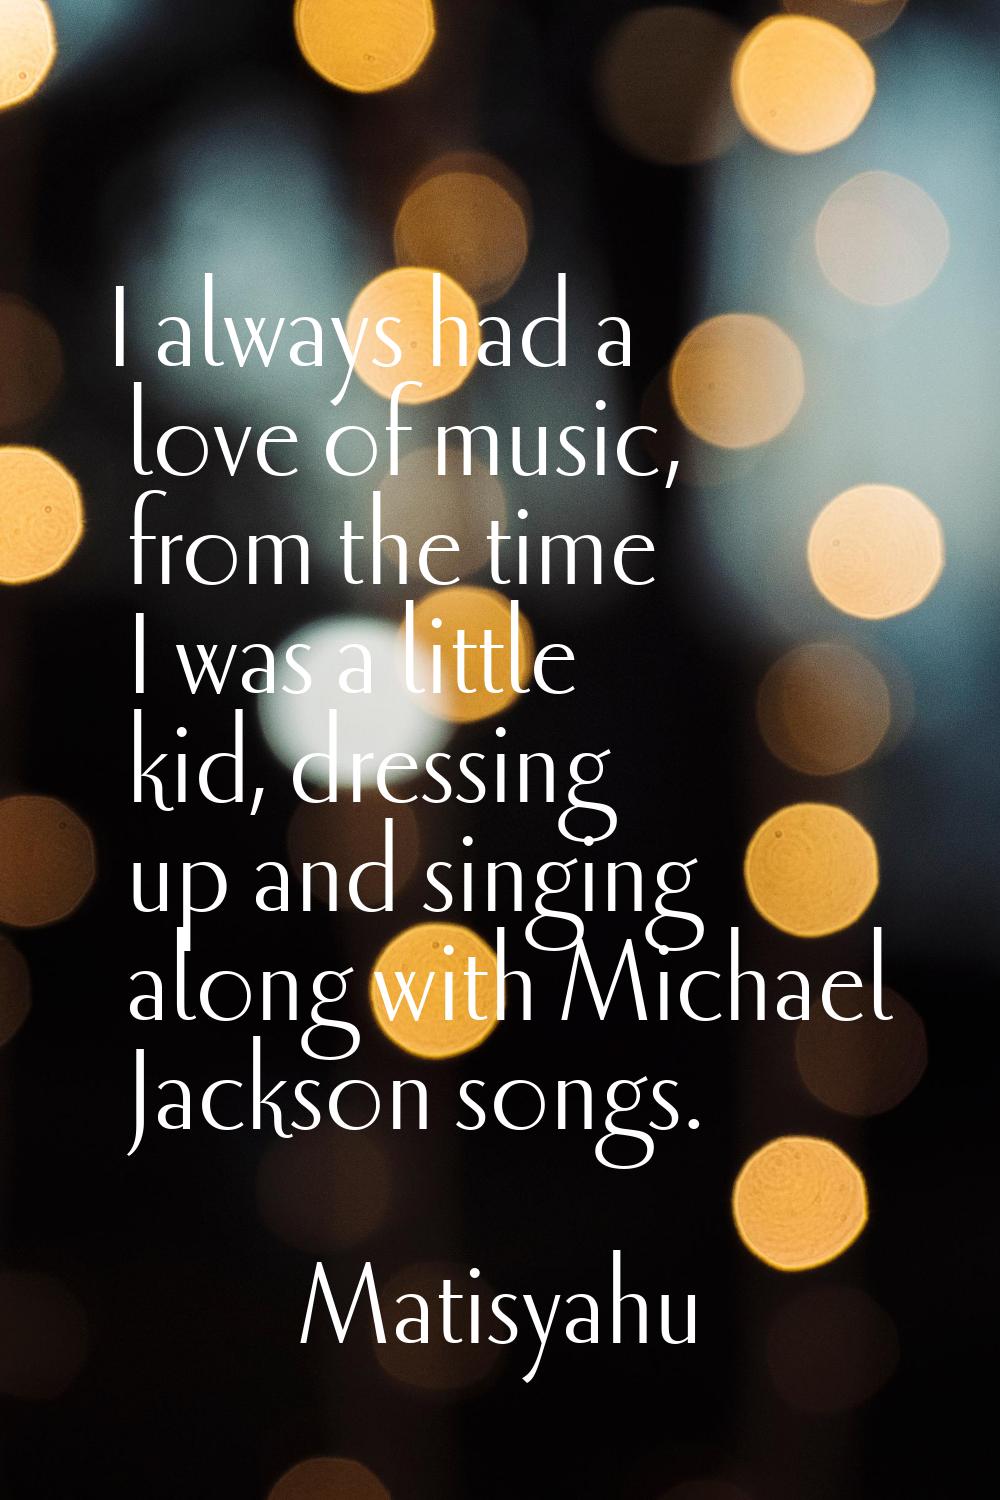 I always had a love of music, from the time I was a little kid, dressing up and singing along with 